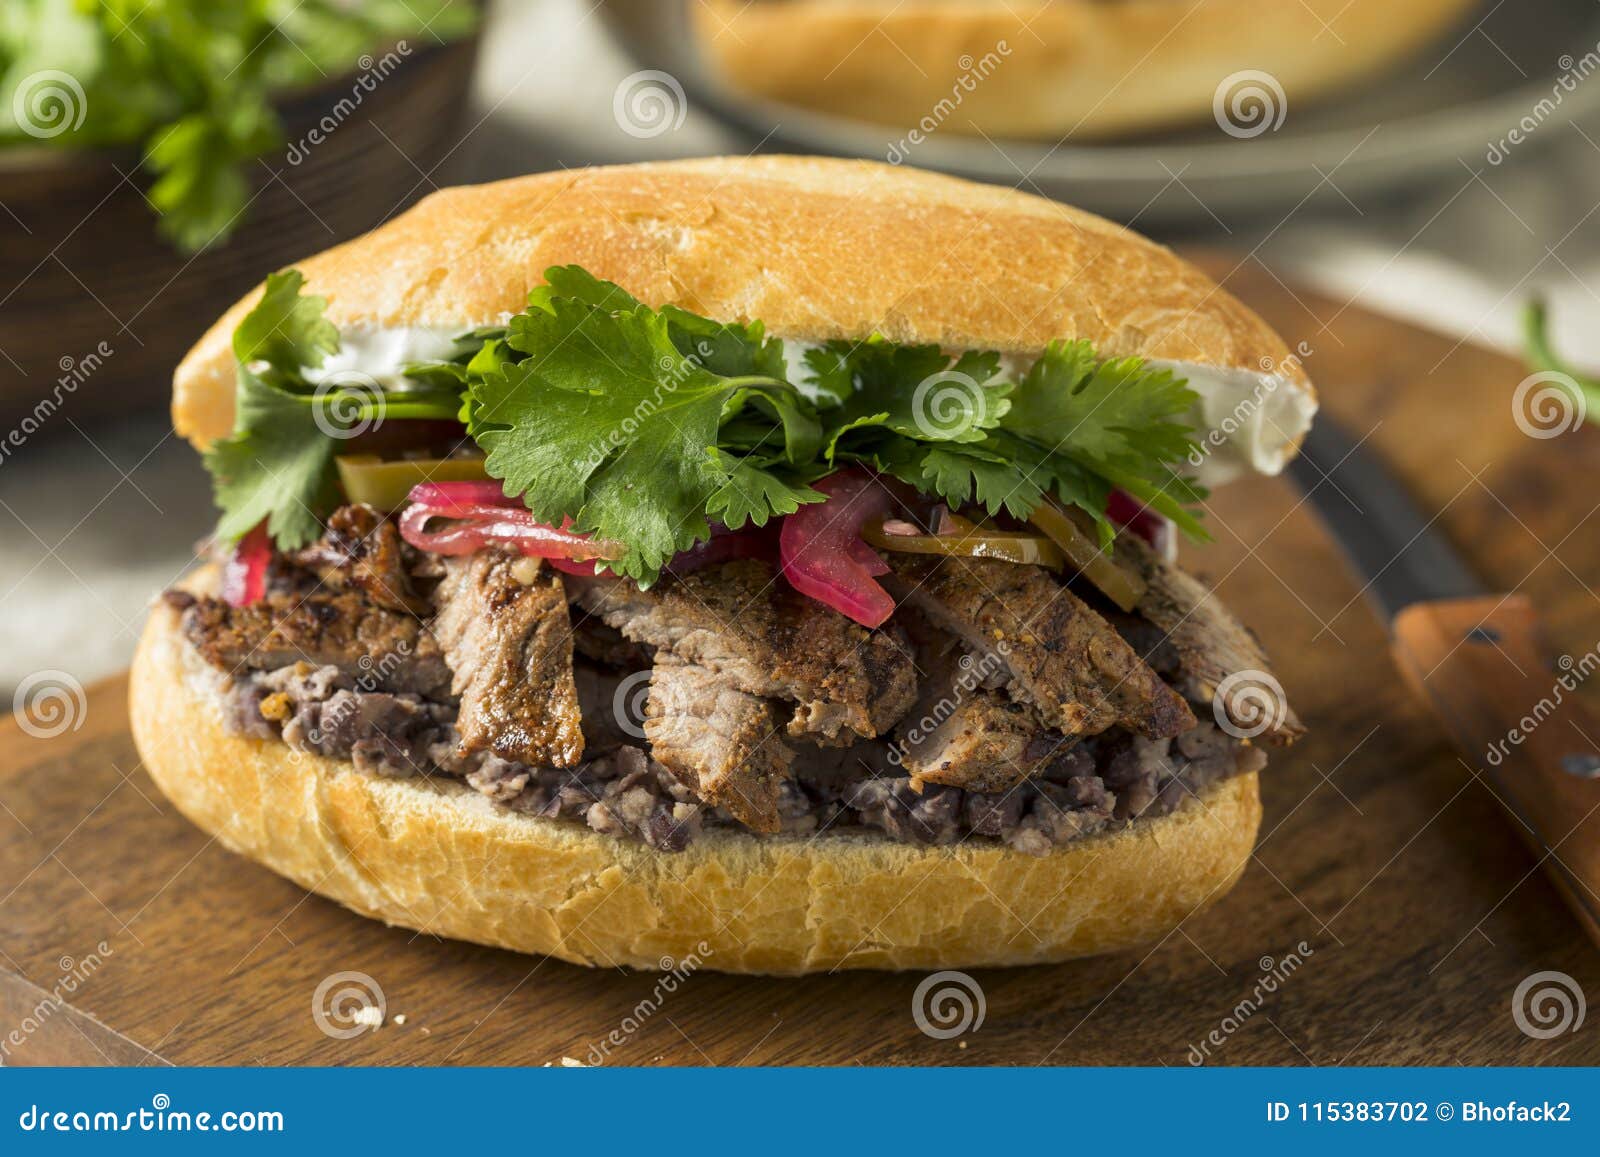 Homemade Mexican Beef Torta Sandwich Stock Photo - Image of salsa ...